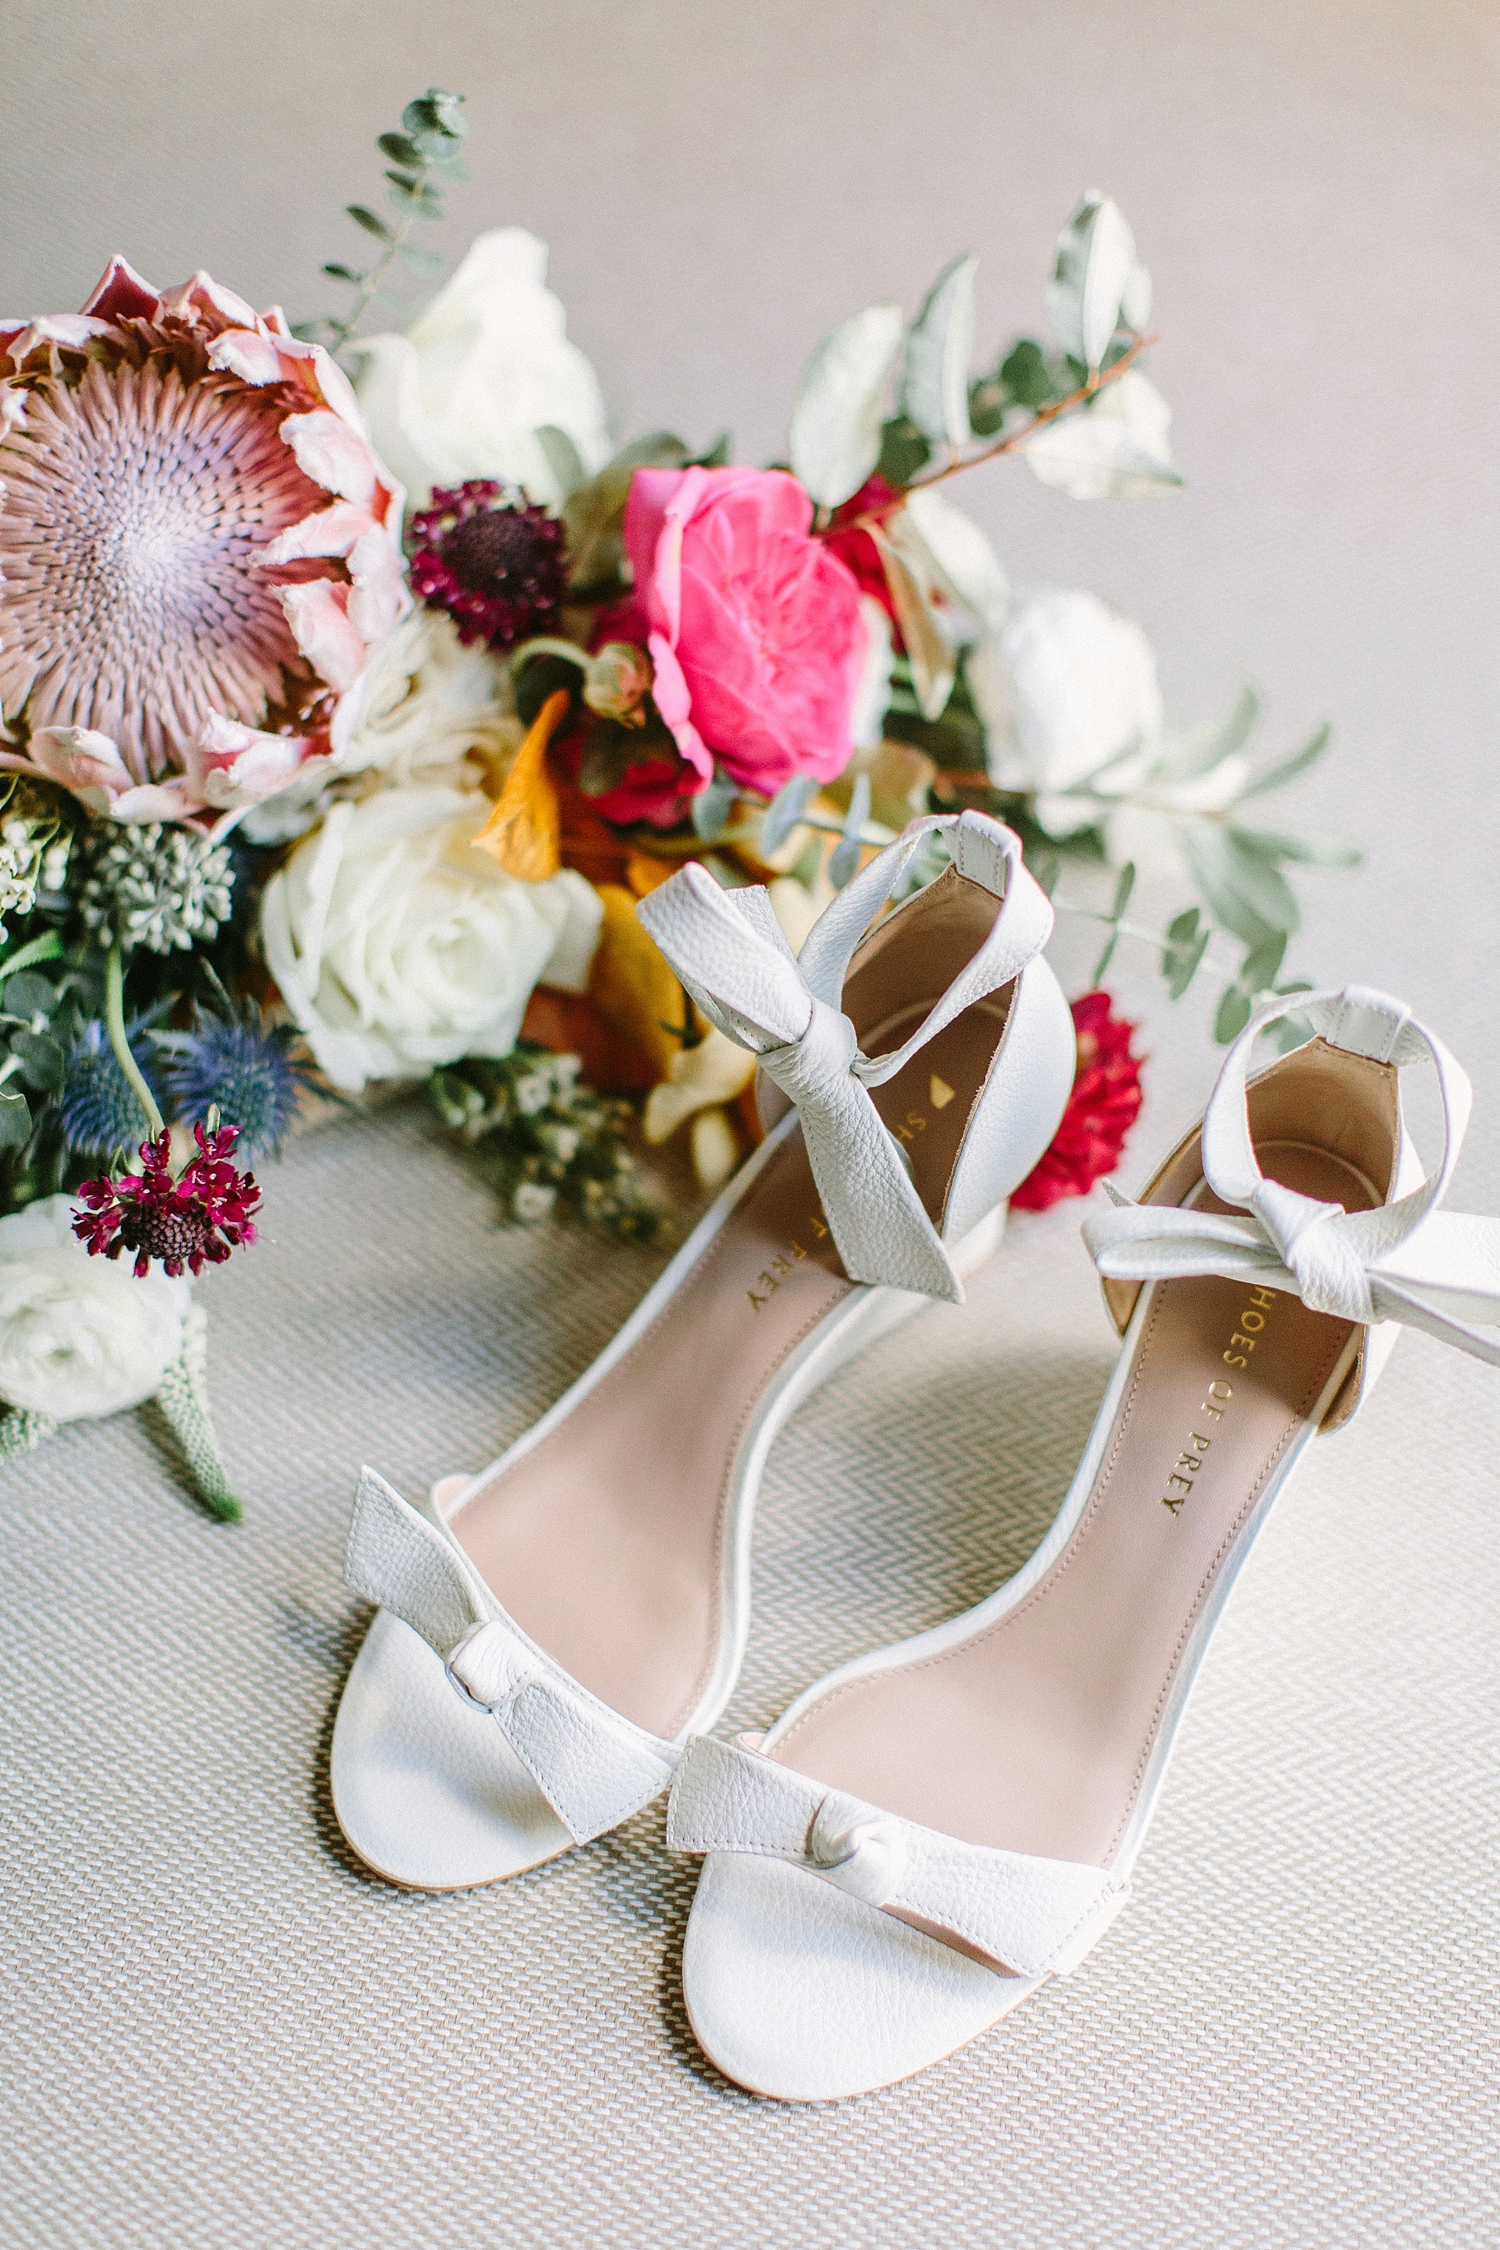 Colorful bridal bouquet and stylish wedding shoes